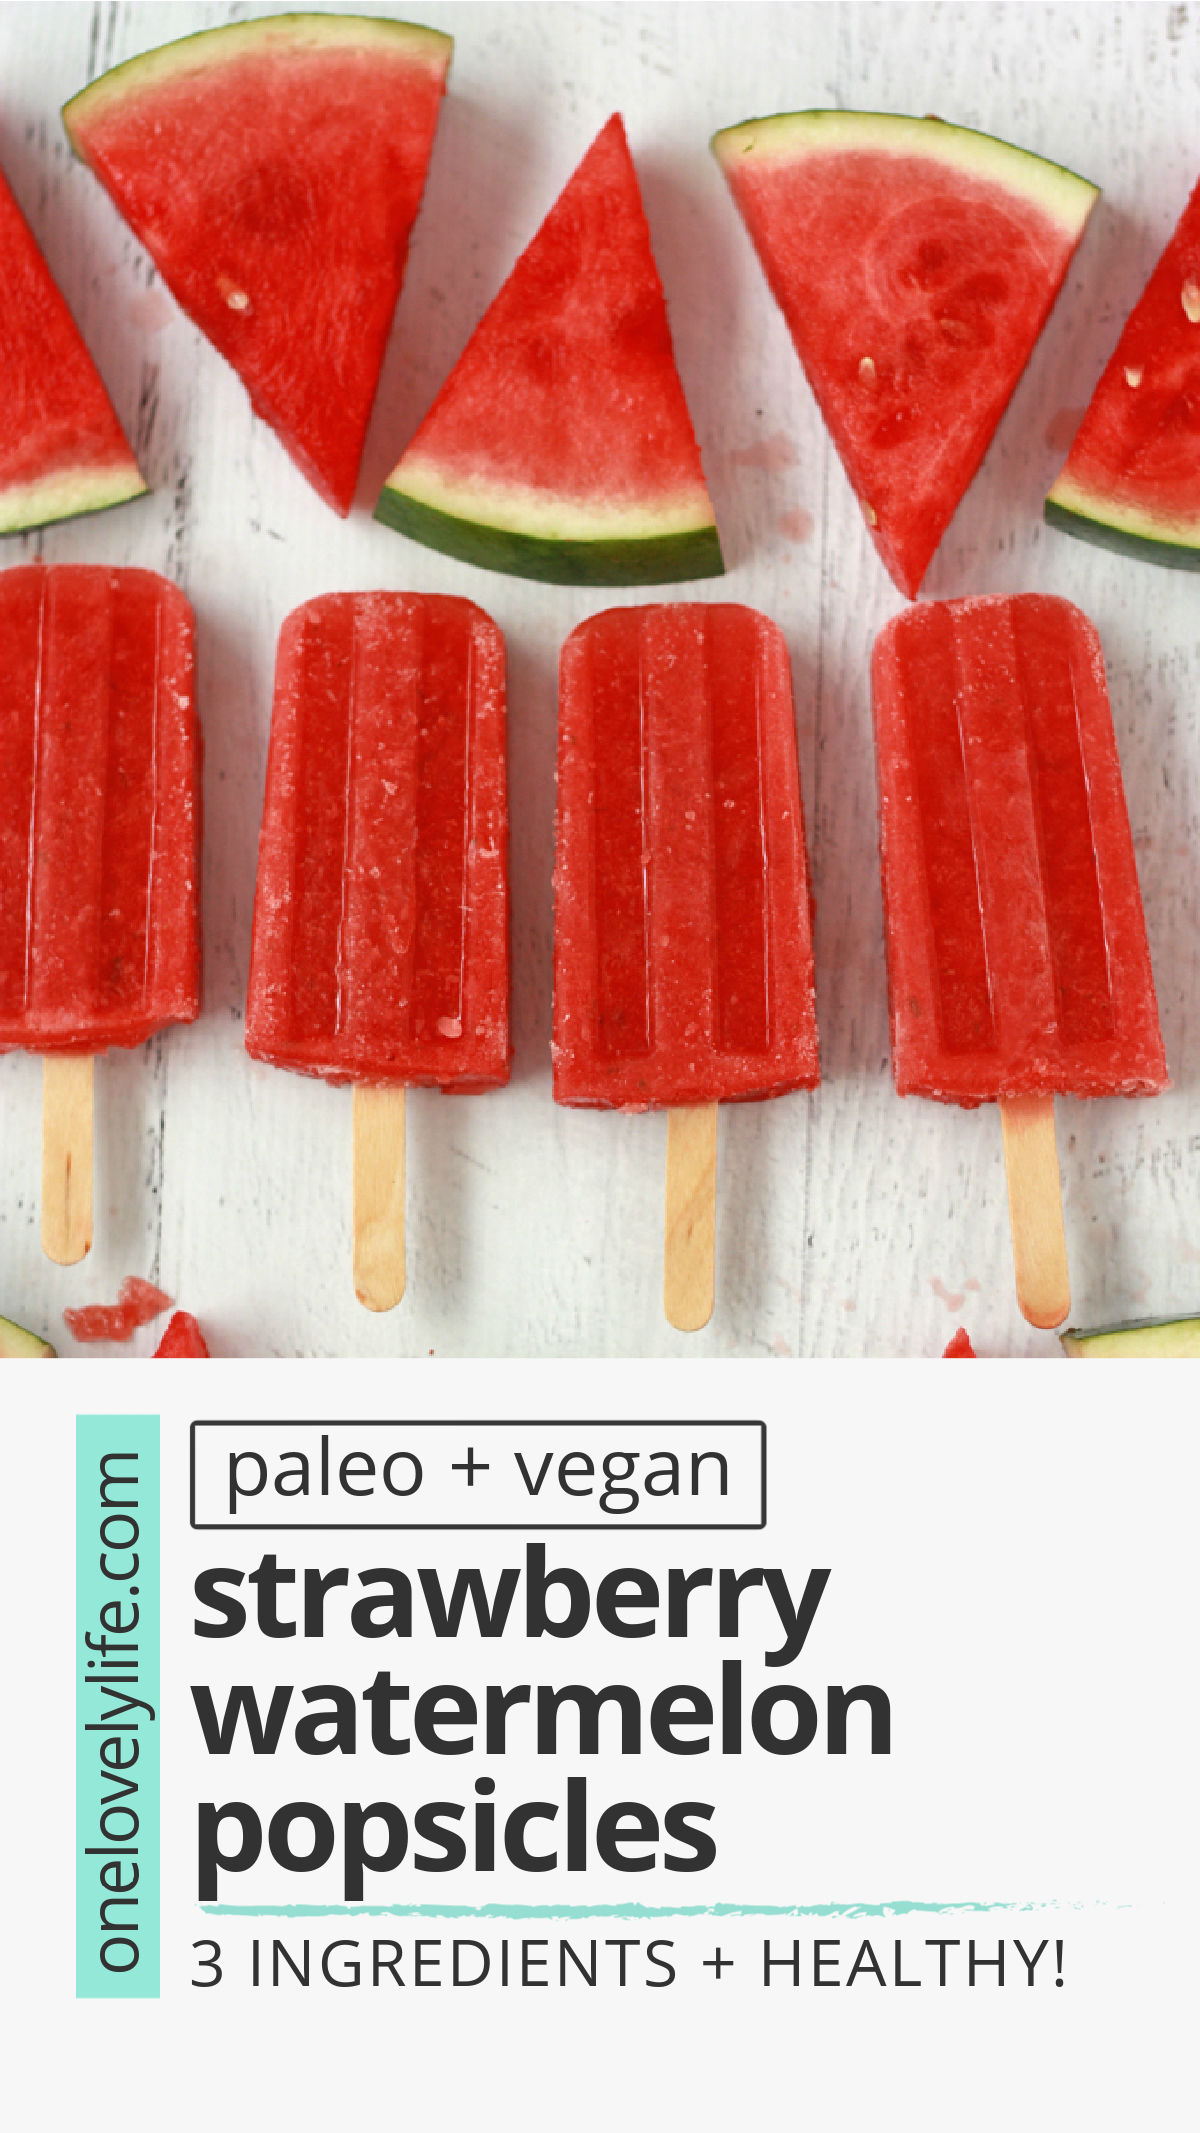 Strawberry Watermelon Popsicles are a fresh, bright, healthy warm weather treat! They're 100% fruit and naturally help balance your electrolytes. (Vegan & paleo) // healthy popsicles // strawberry popsicles // watermelon popsicles // paleo popsicles // vegan popsicles // naturally sweetened // healthy snack //